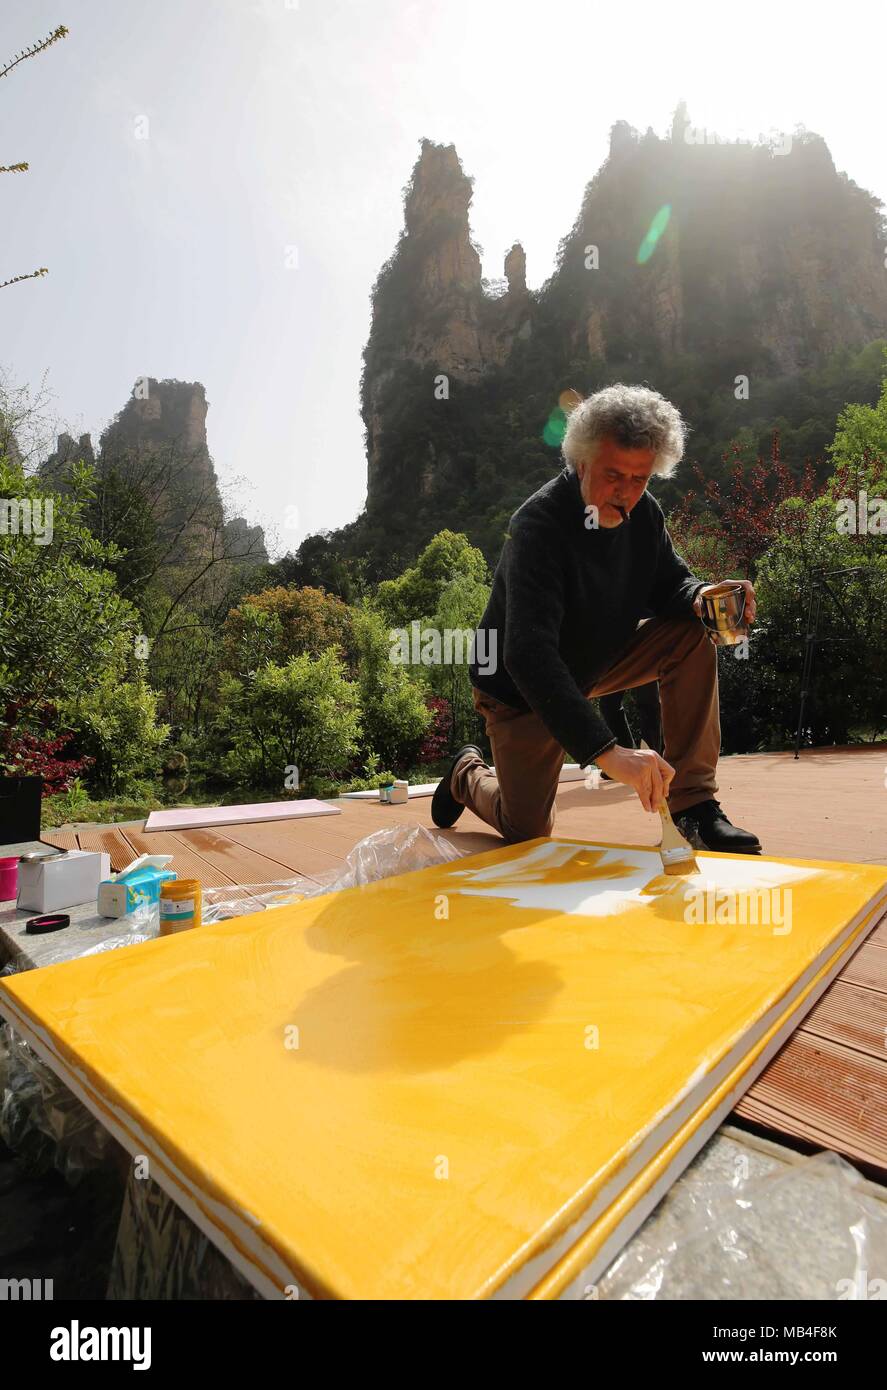 Zhangjiajie, China's Hunan Province. 6th Apr, 2018. Francesco Roviello from Italy paints at Zhangjiajie UNESCO Global Geopark at Wulingyuan District of Zhangjiajie City, central China's Hunan Province, April 6, 2018. About 21 artists coming from Italy took part in a cultural event at the geopark which is known for its quartzose sandstone landform. This geopark is one of the geoparks in China that have already been chosen by UNESCO on its World Network of Geoparks. Credit: Wu Yongbing/Xinhua/Alamy Live News Stock Photo